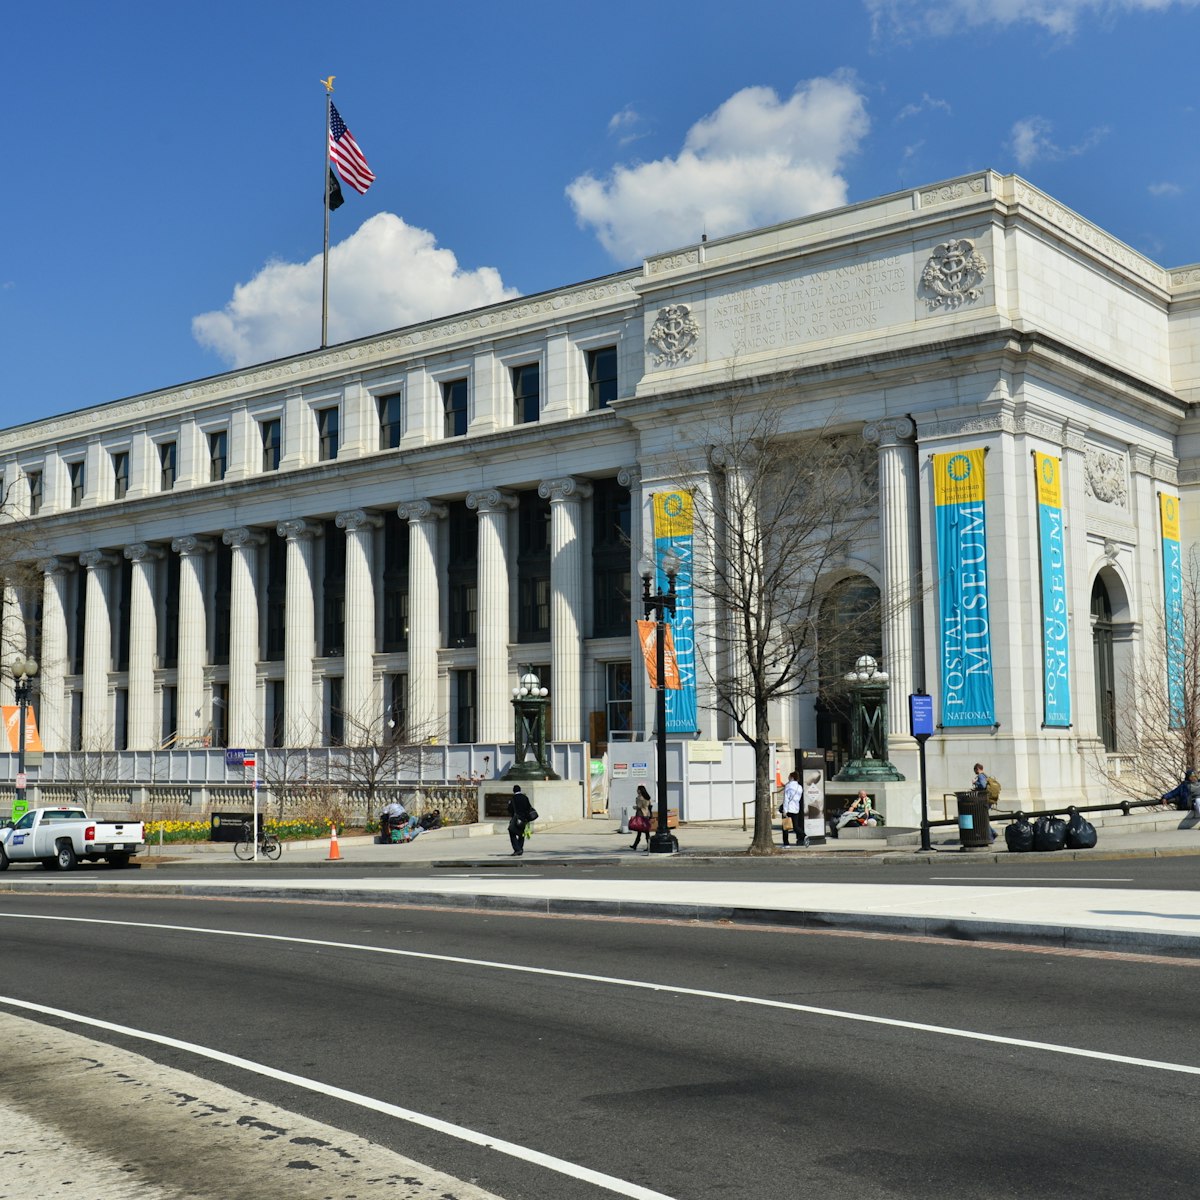 National Postal Museum Building, Washington DC, United States; Shutterstock ID 134185841; Your name (First / Last): redownload; GL account no.: redownload; Netsuite department name: redownload; Full Product or Project name including edition: redownload